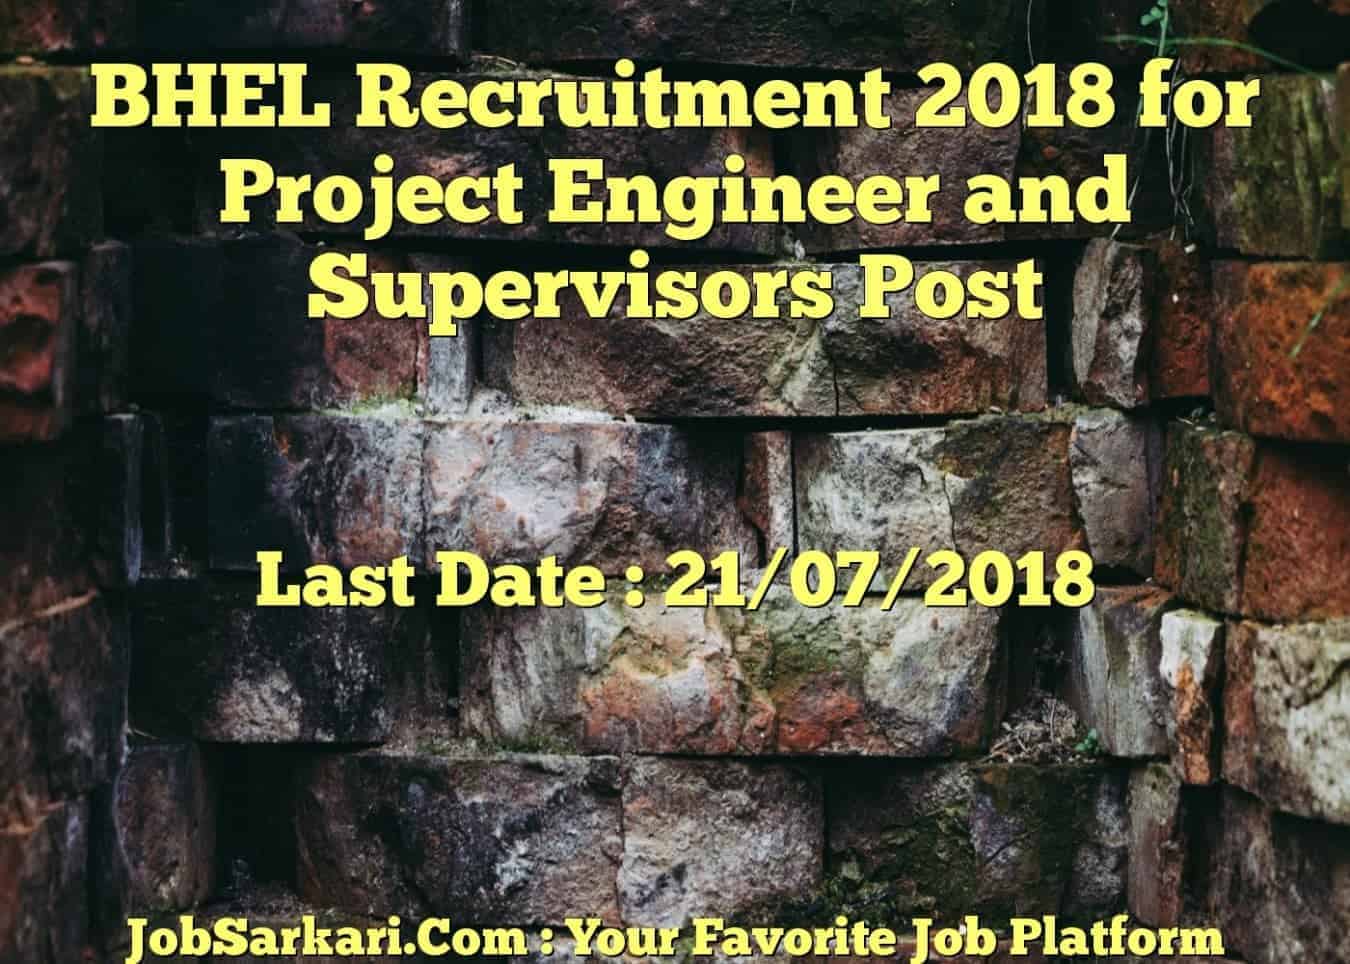 BHEL Recruitment 2018 for Project Engineer and Supervisors Post